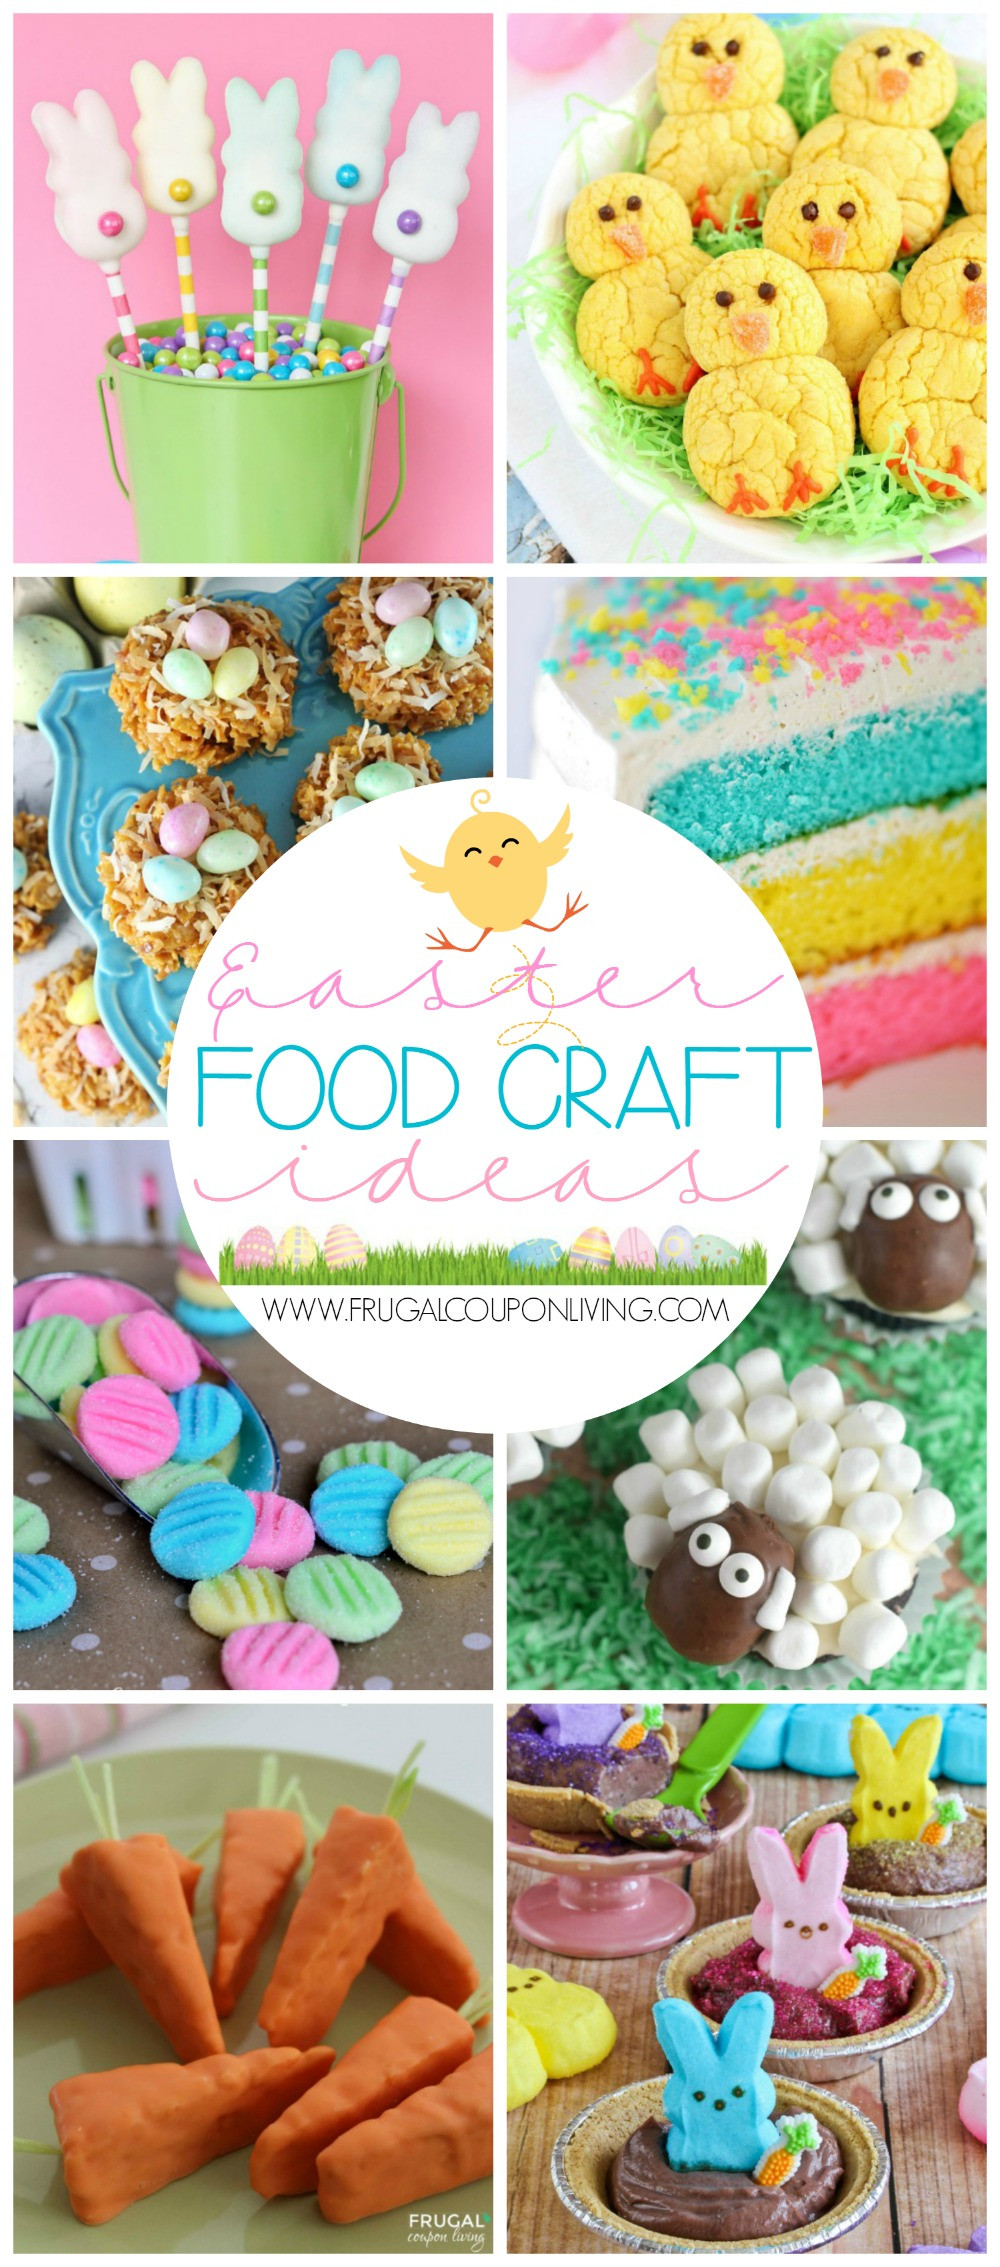 Classroom Easter Party Food Ideas
 Easter Food Craft Ideas for the Kids